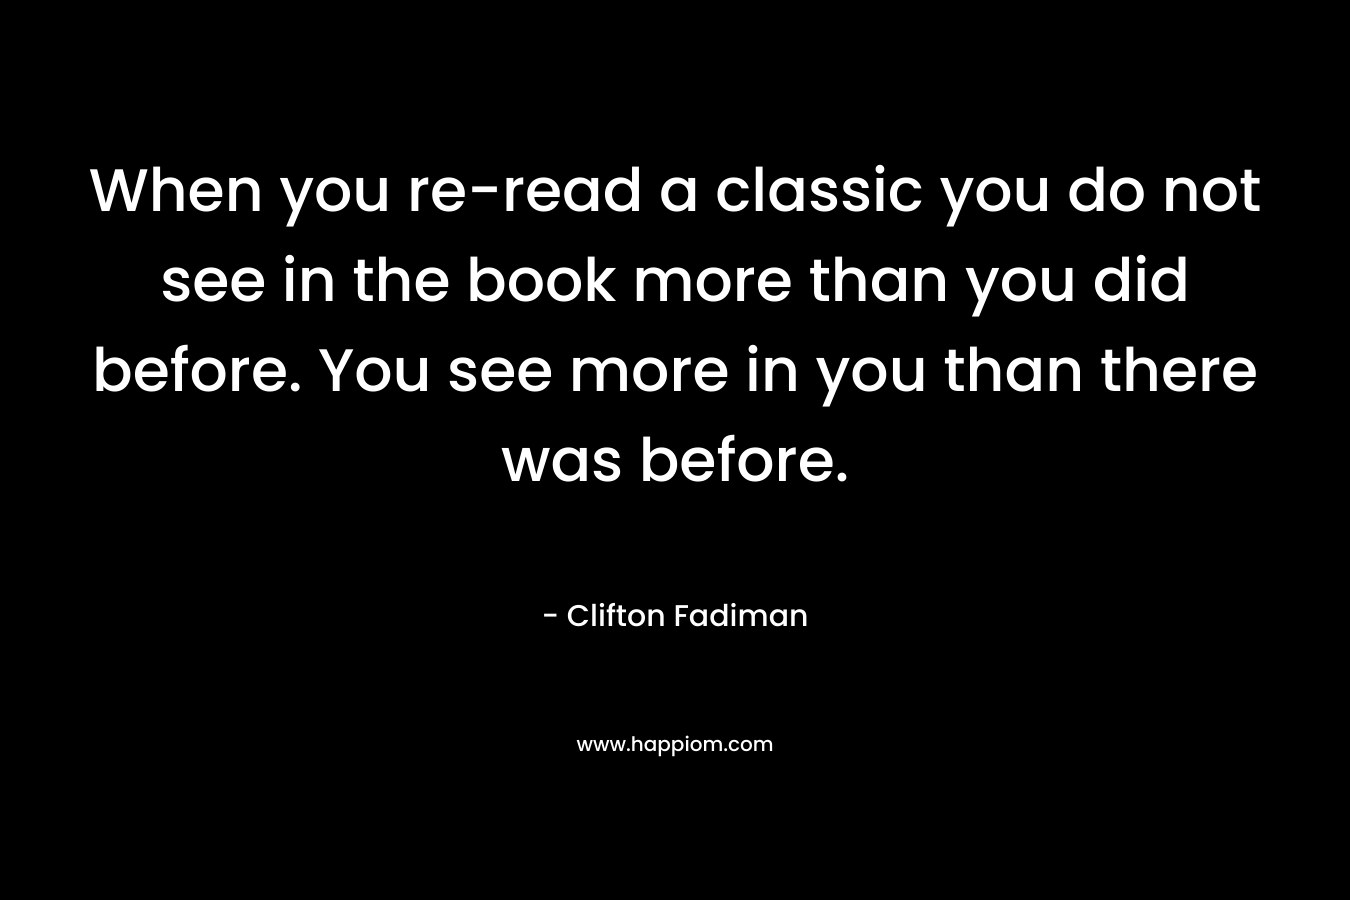 When you re-read a classic you do not see in the book more than you did before. You see more in you than there was before.